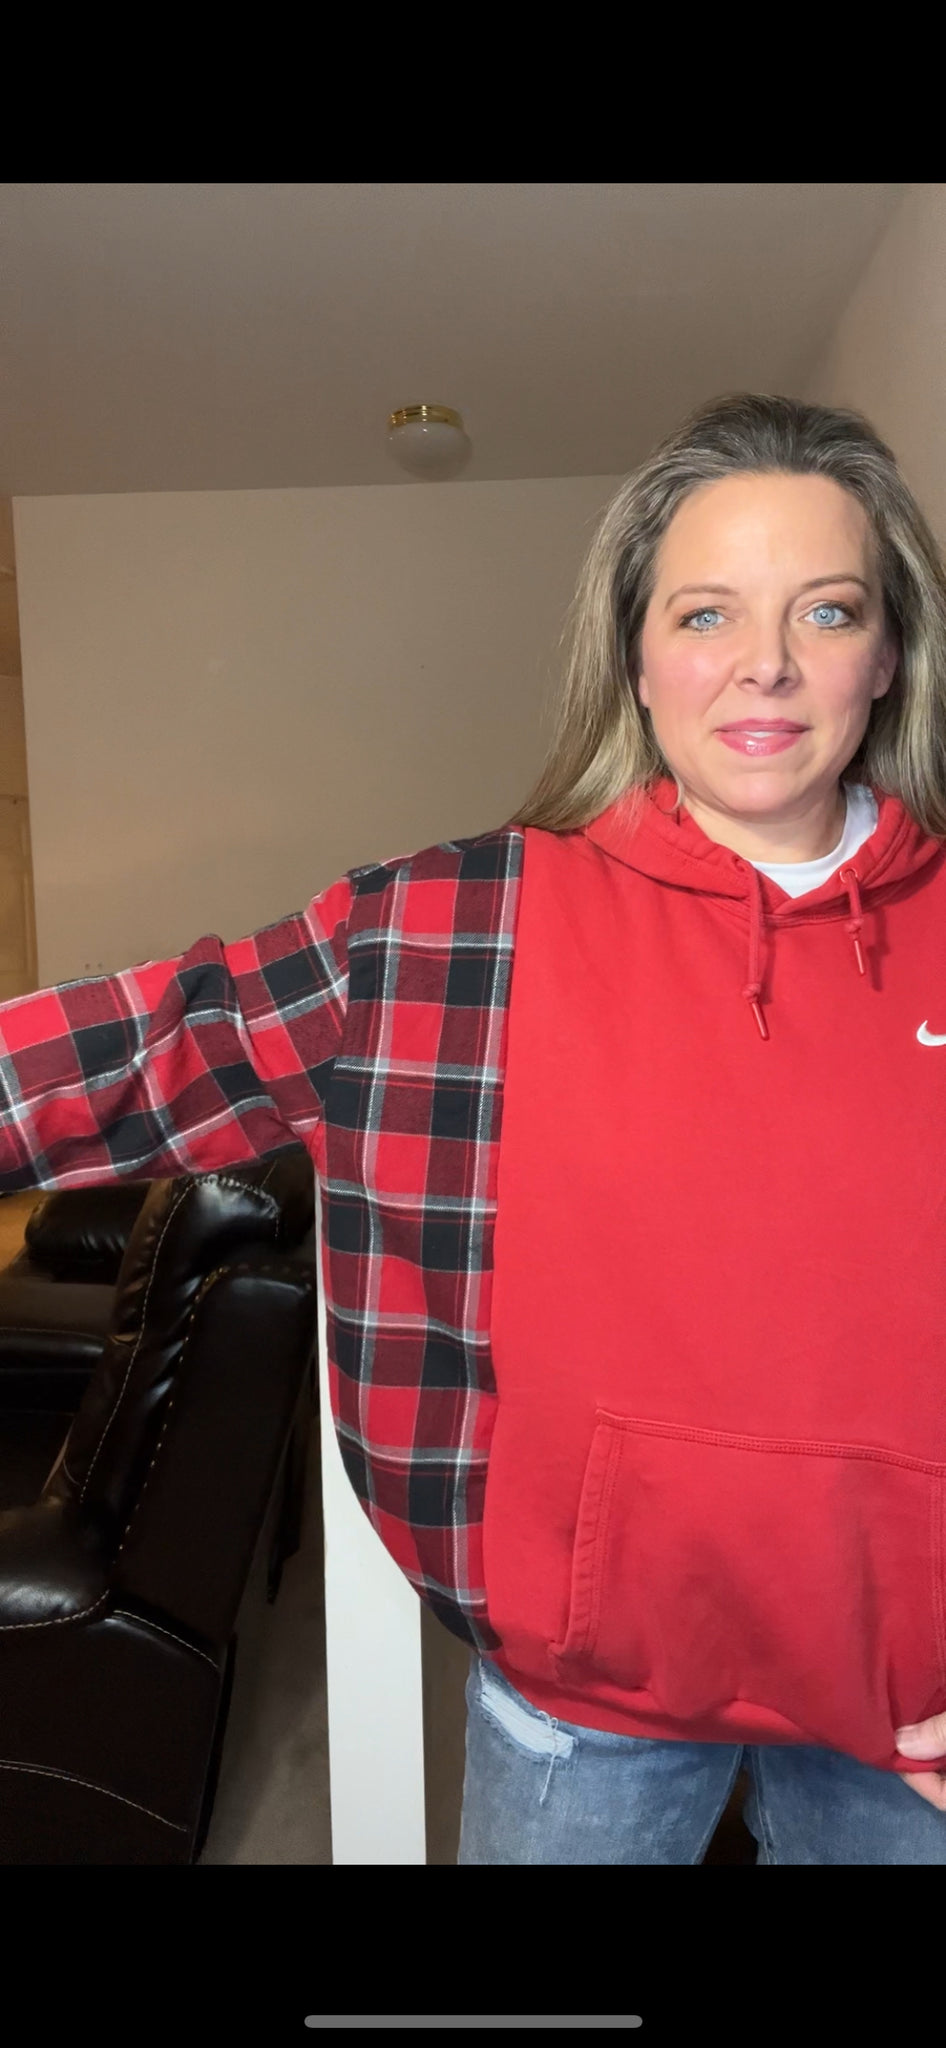 Upcycled Red Nike – women’s XL – thick sweatshirt with flannel sleeves ￼